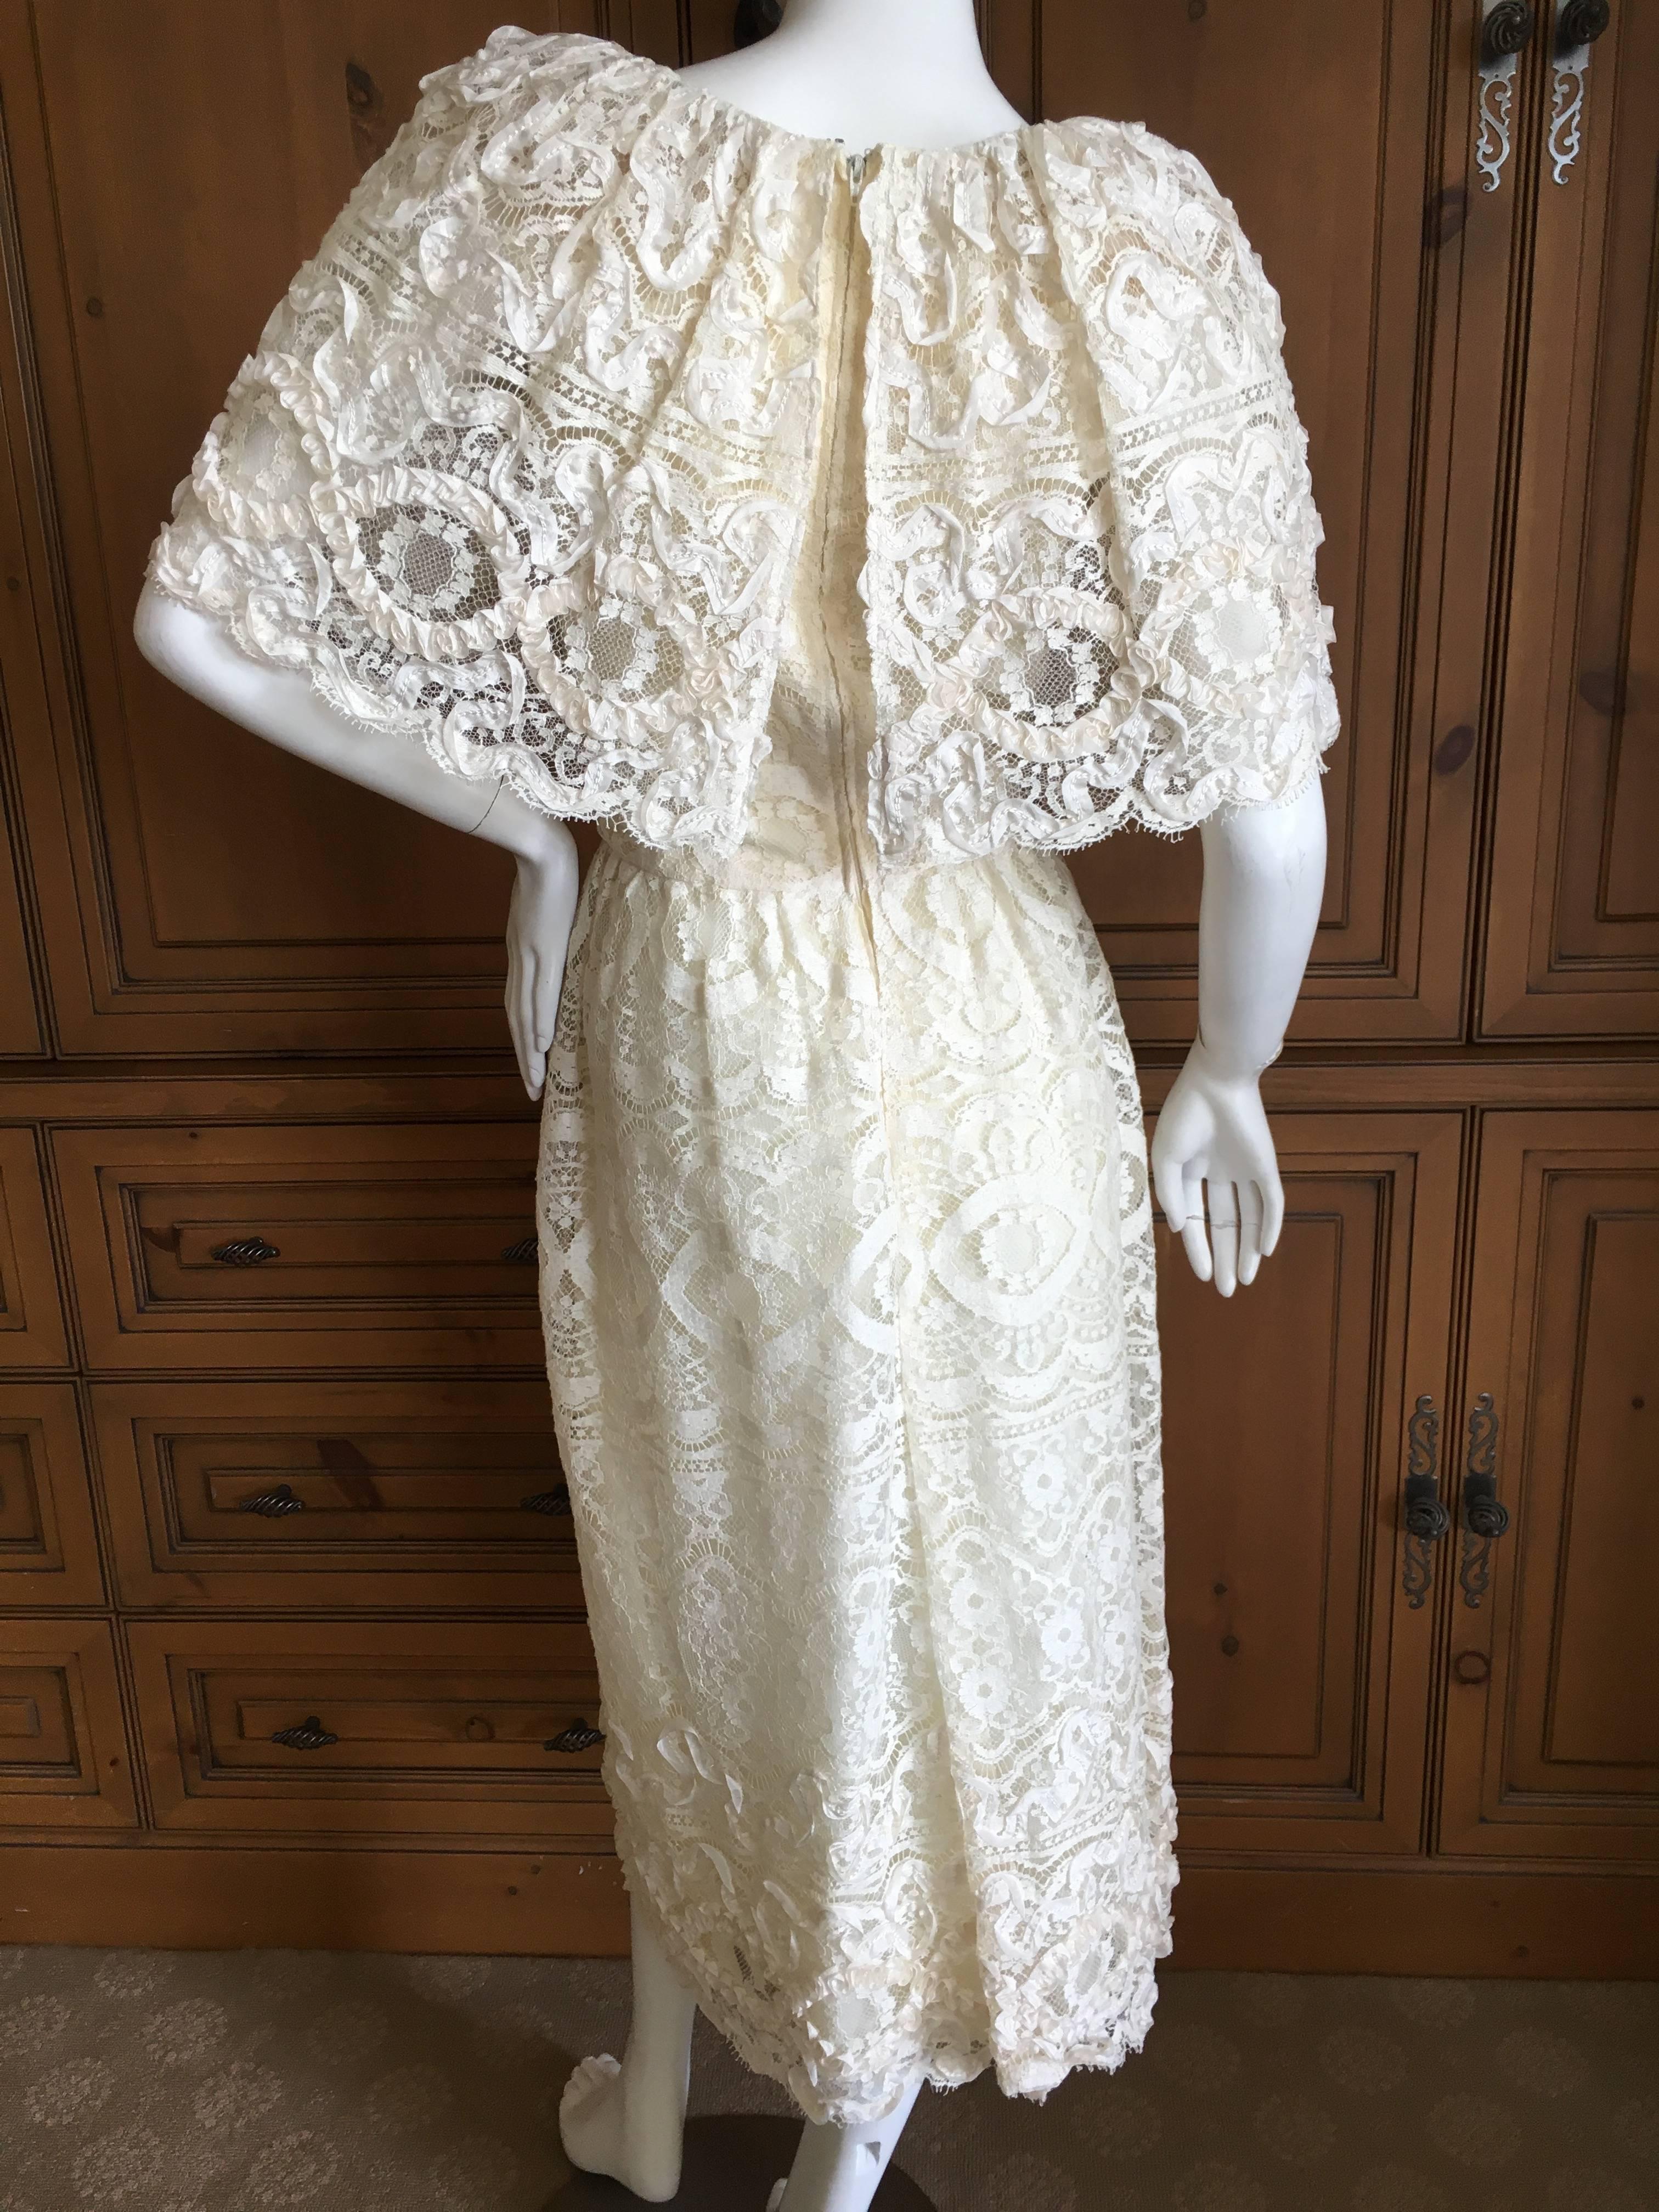 Women's Cream Lace Cape Collar Dress from Morton Myles for the Warrens For Sale